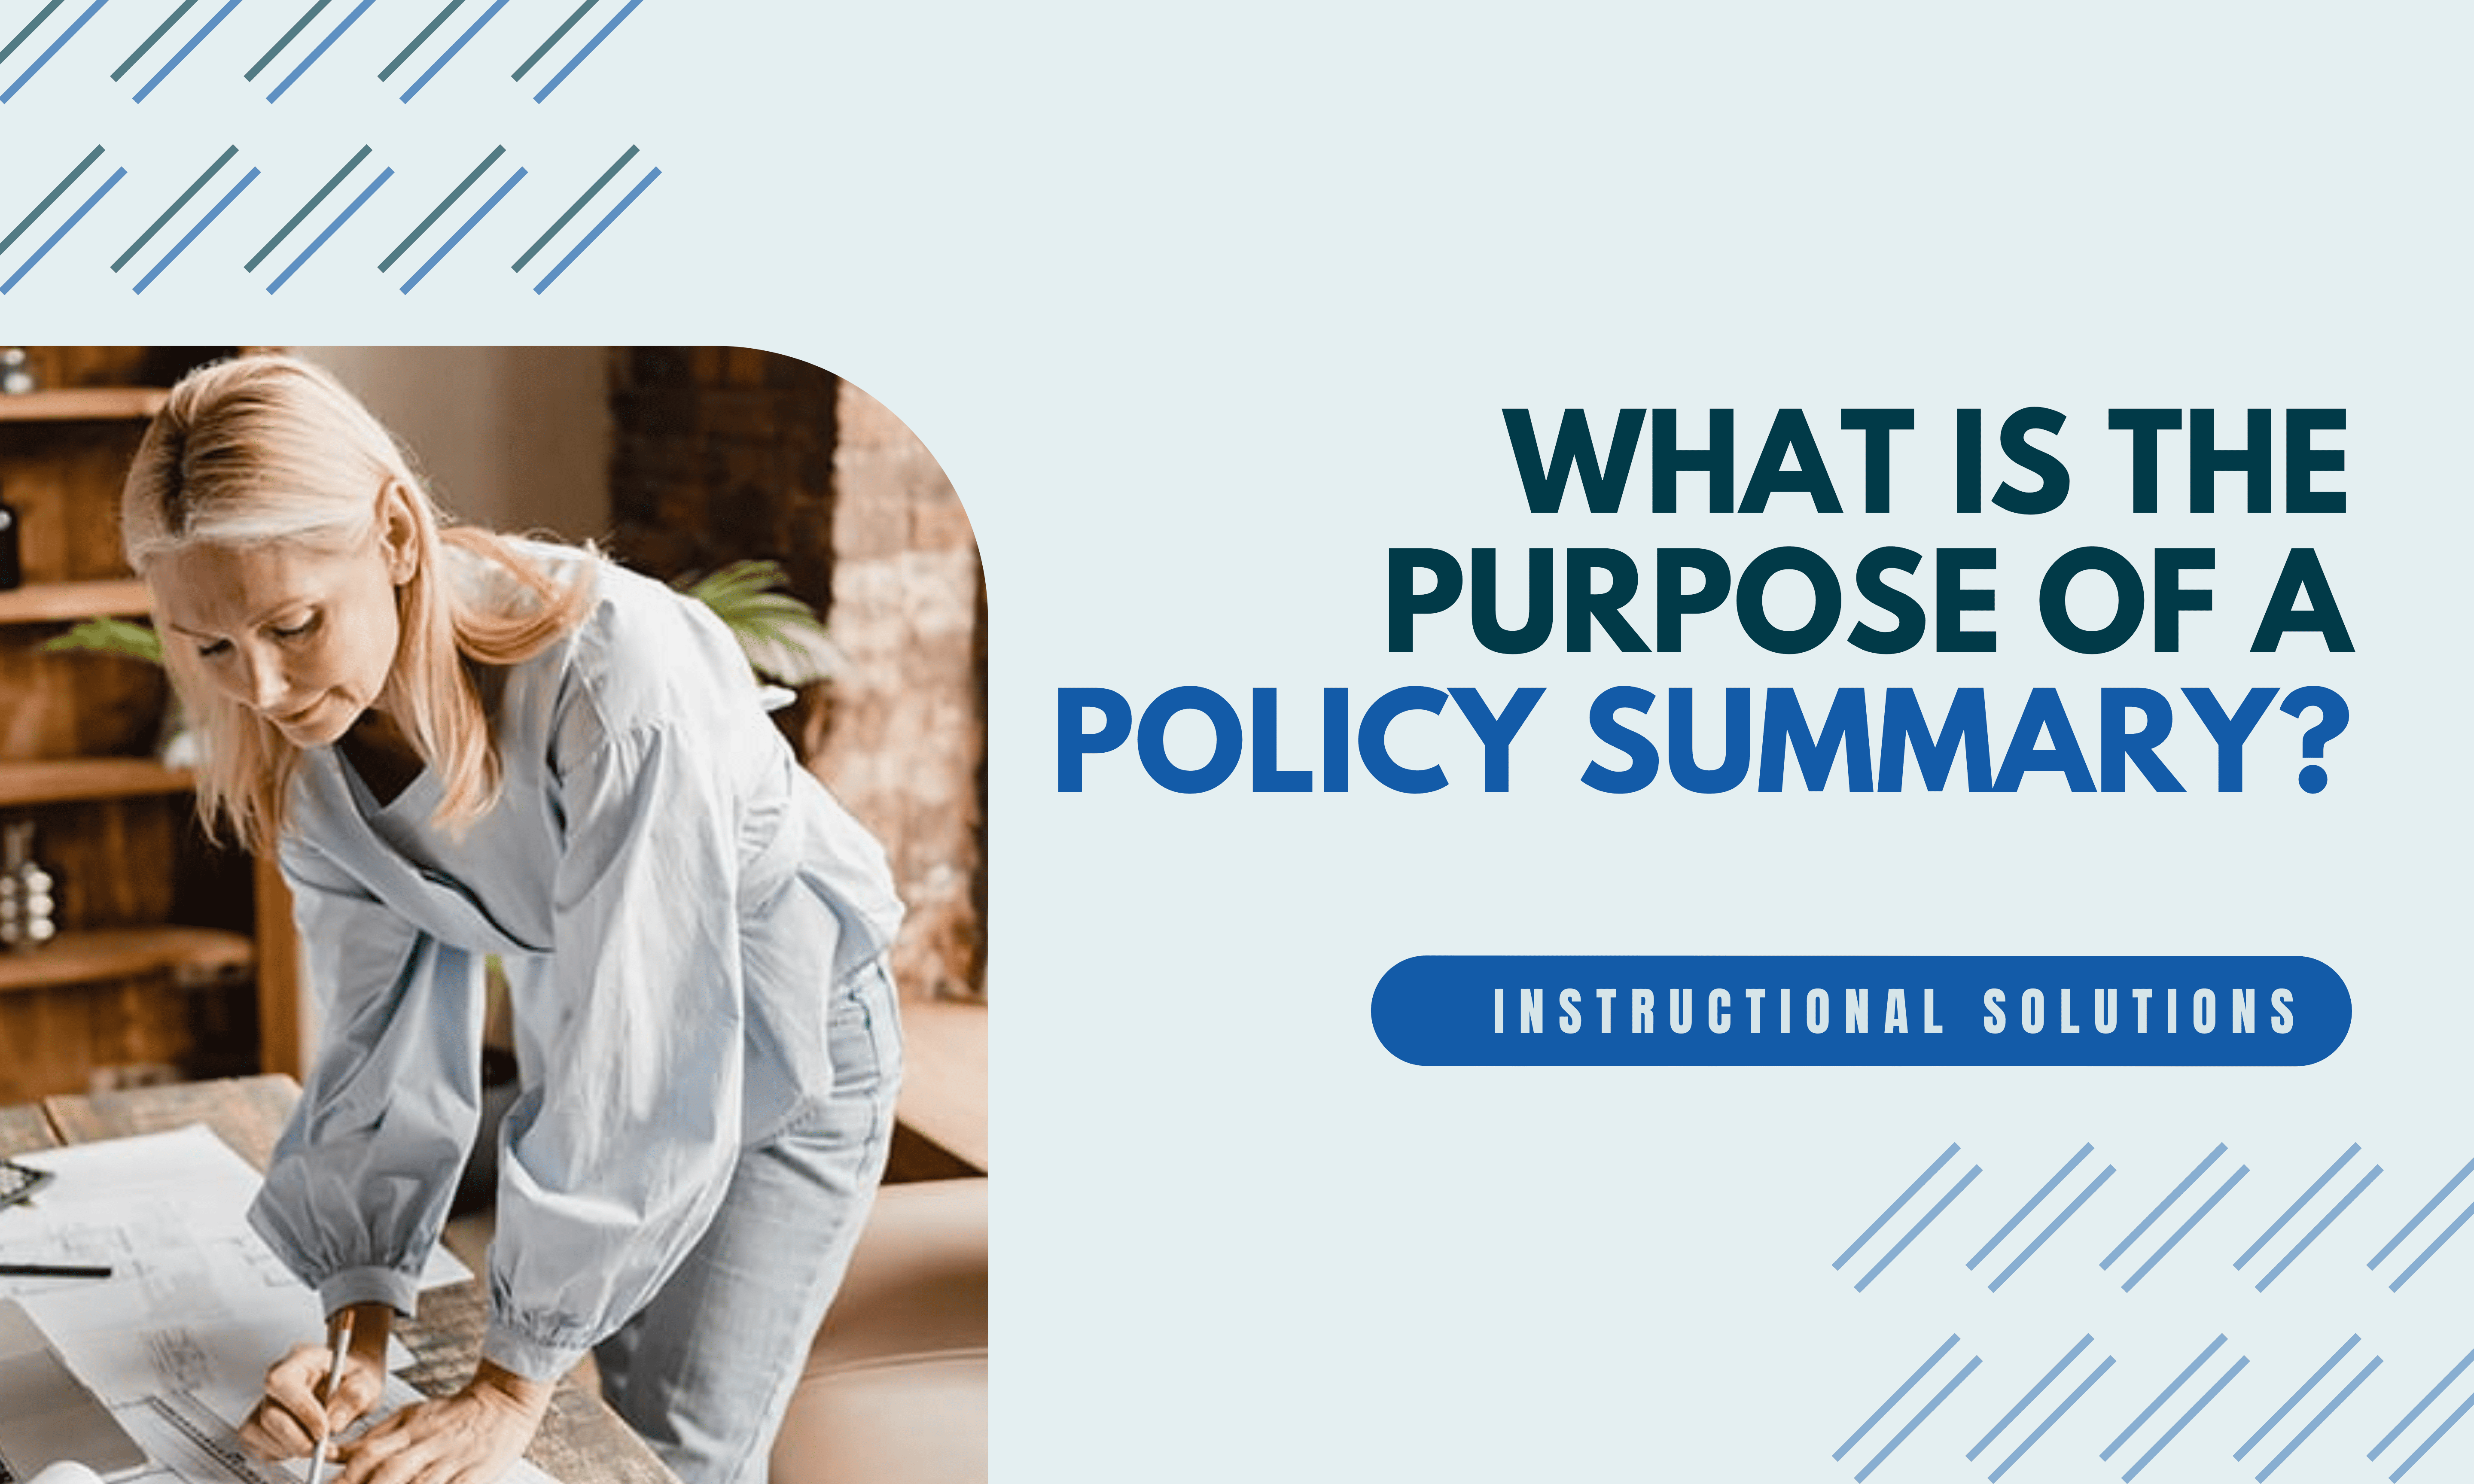 What Is the Purpose of a Policy Summary?